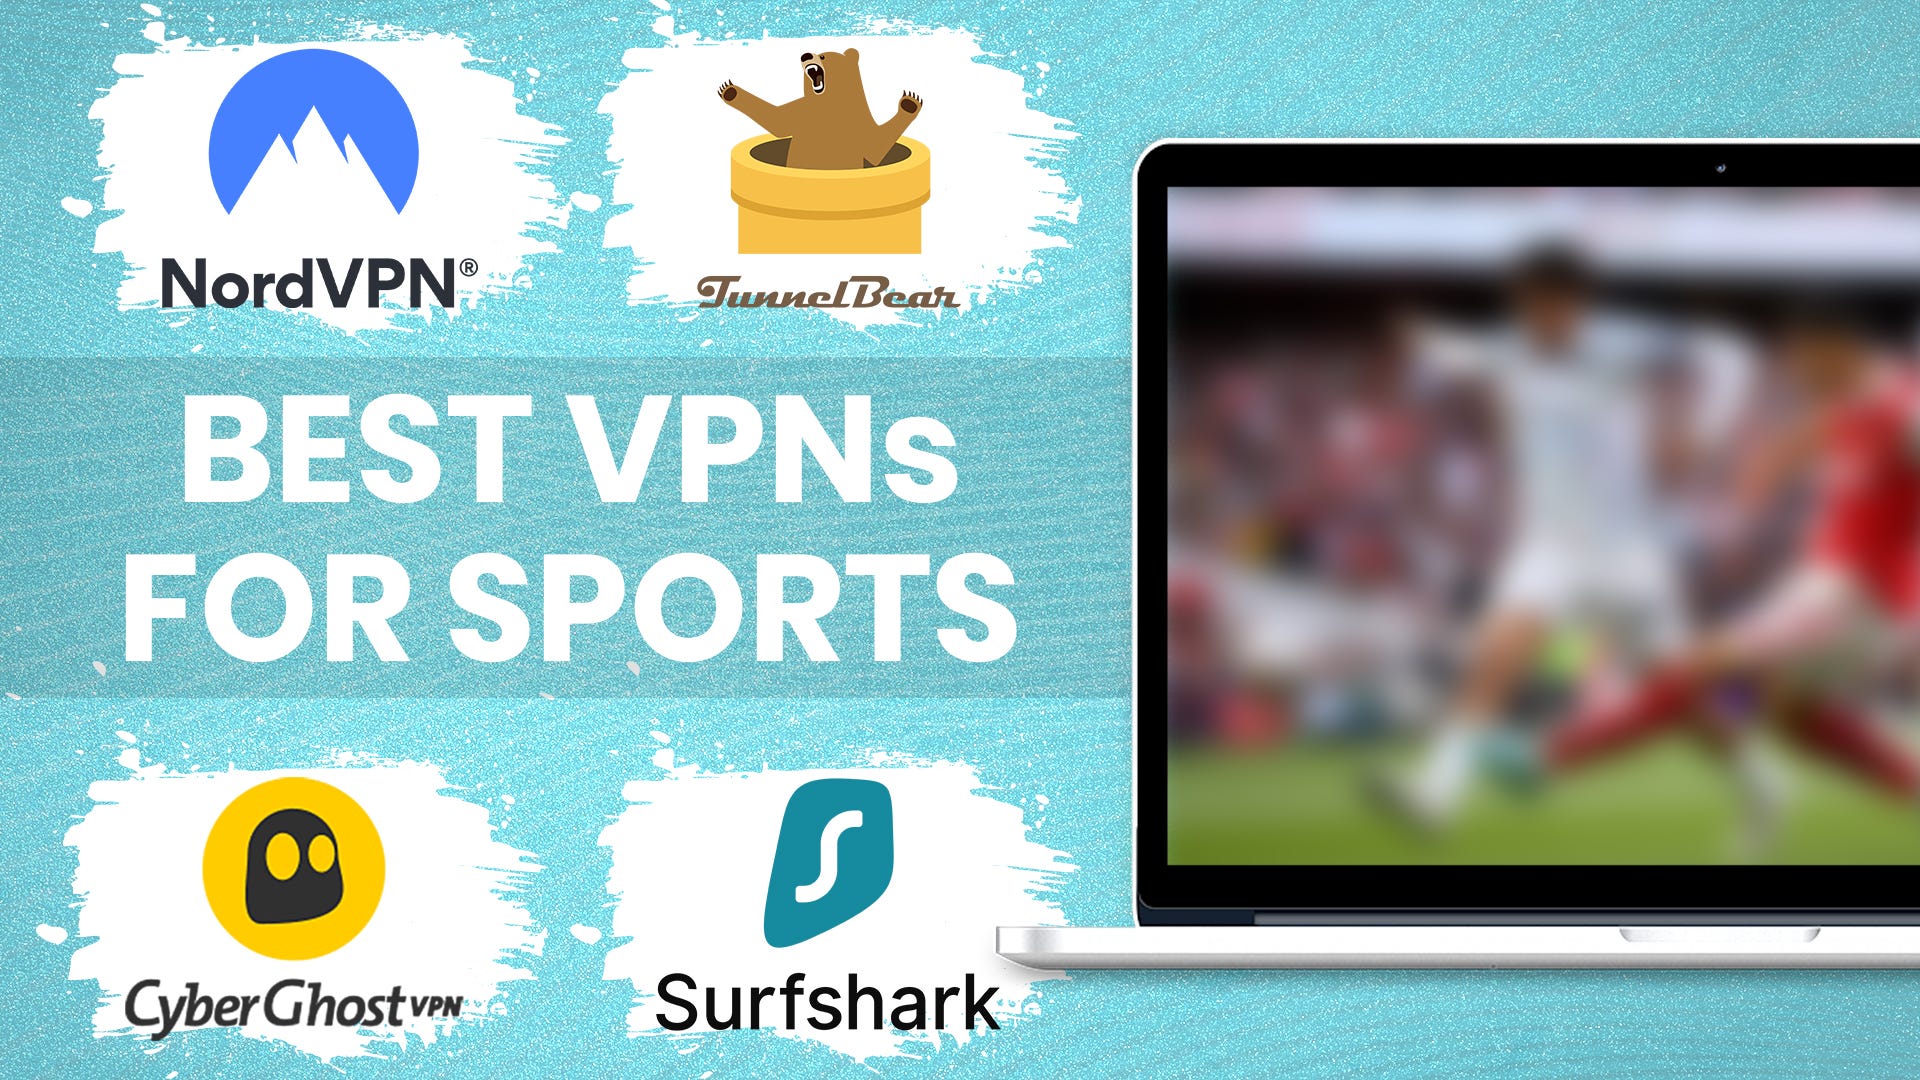 Surfshark – Affordable VPN with Unlimited Devices Support